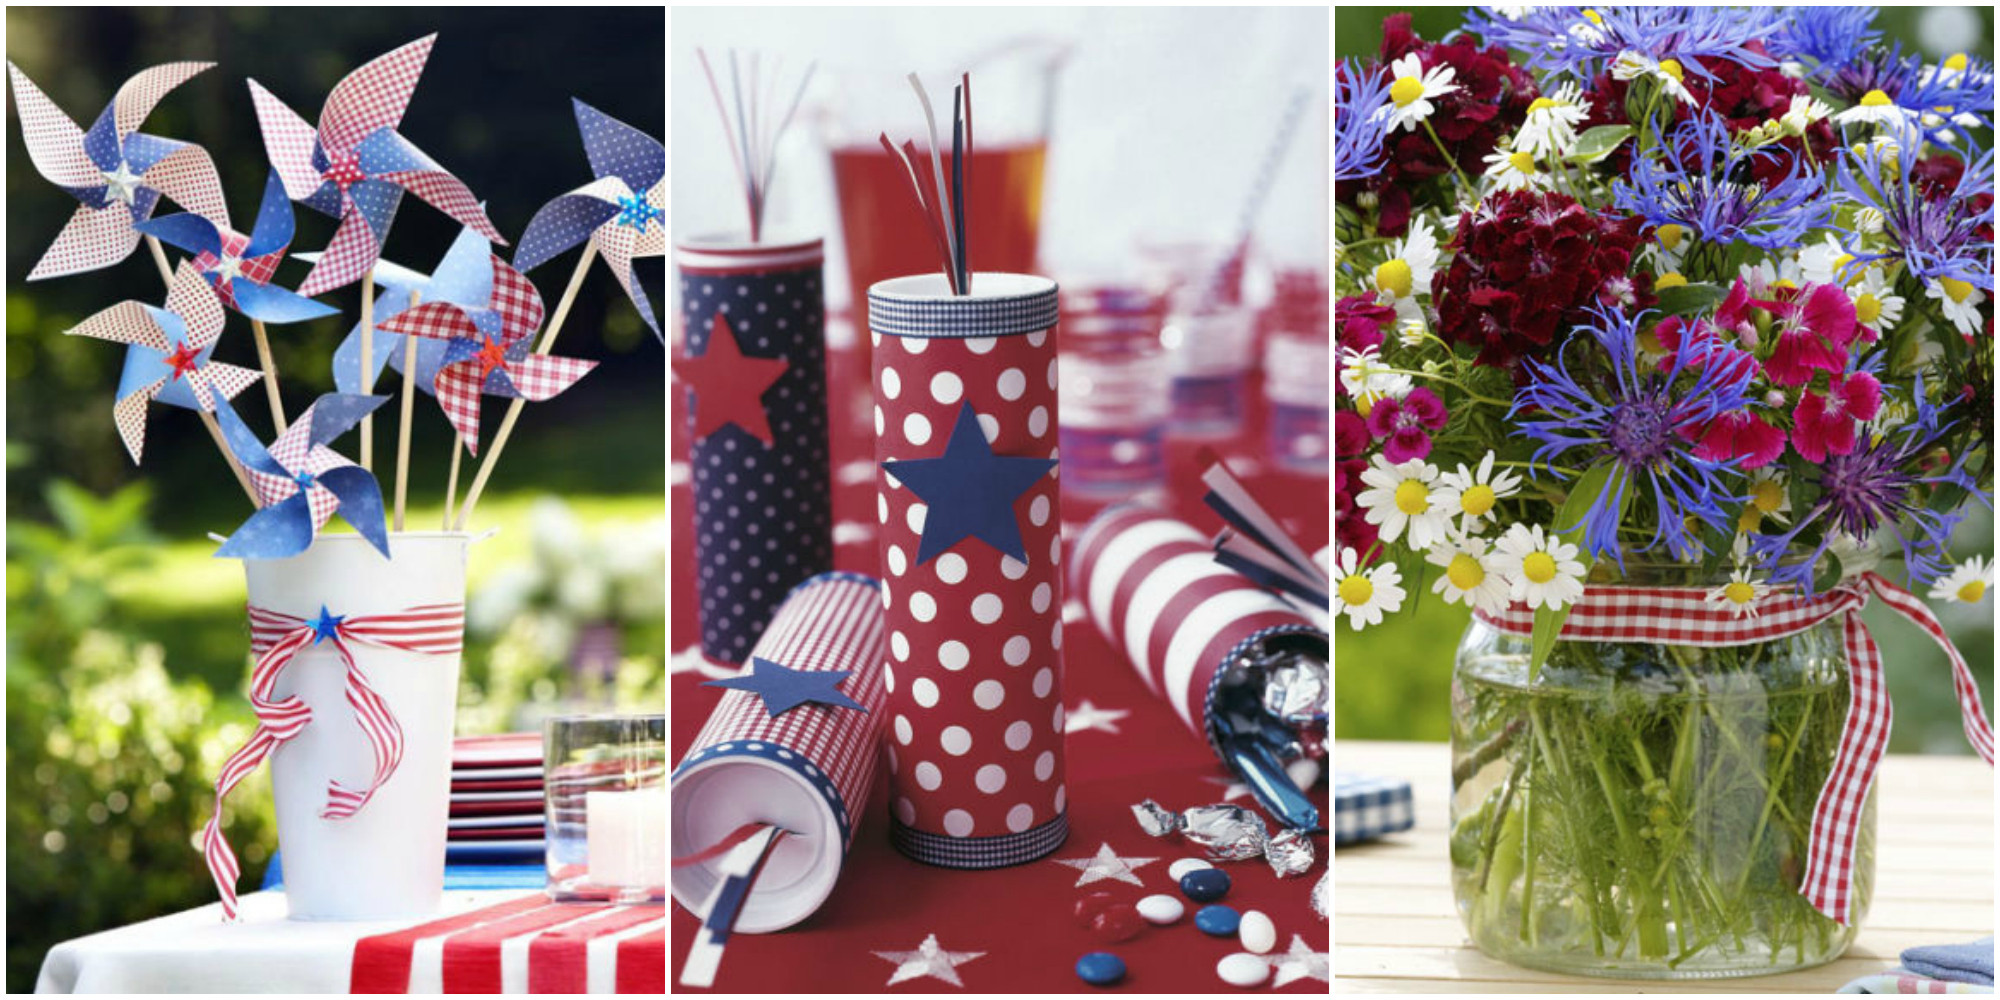 4th Of July Decorating Ideas
 30 DIY 4th of July Decorations 2017 Patriotic Fourth of